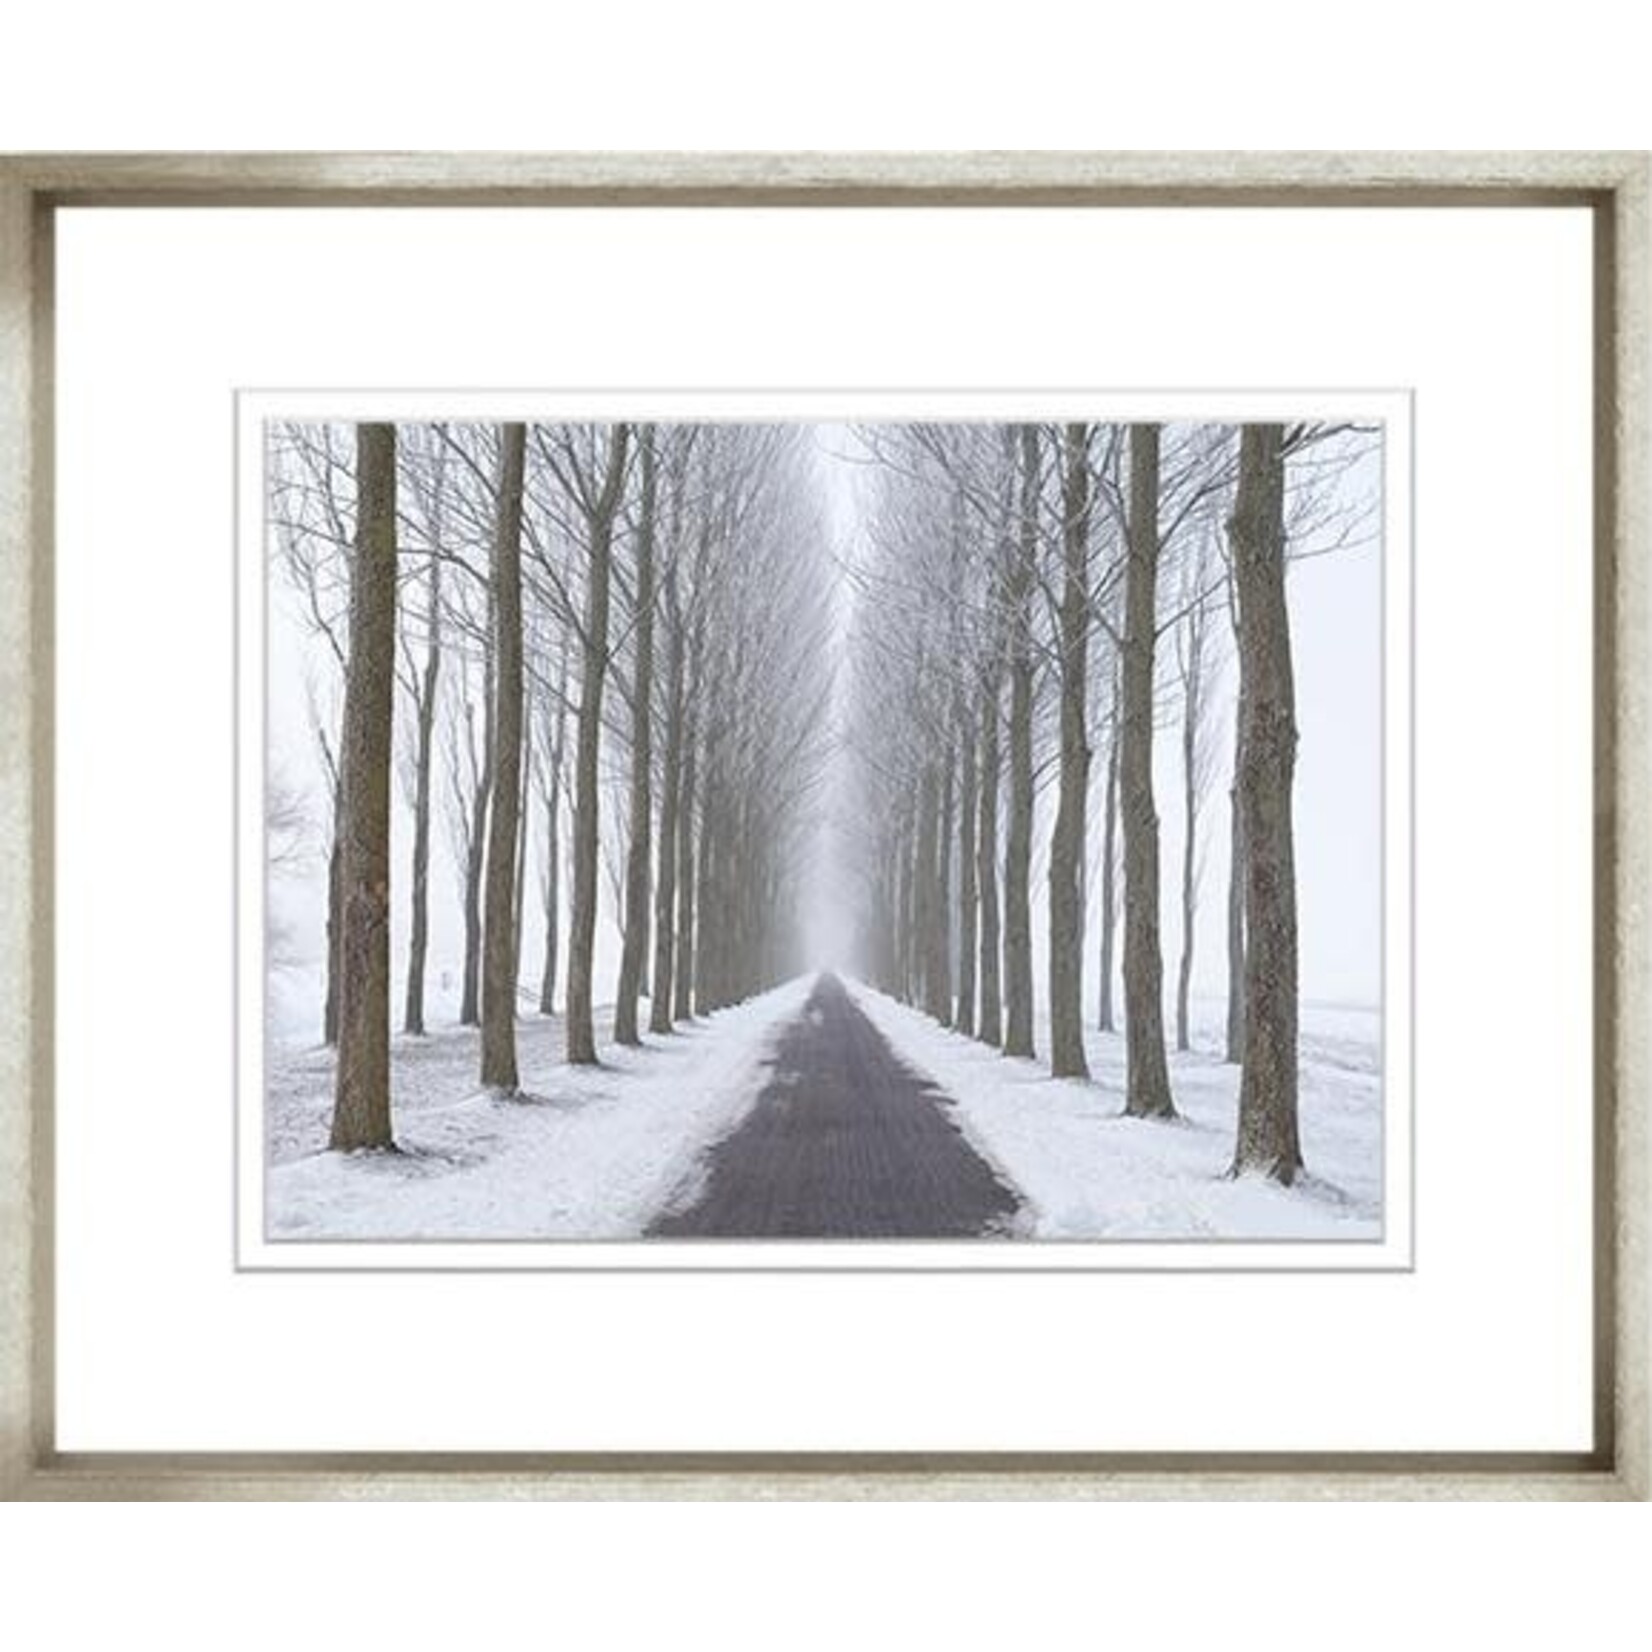 Trowbridge Gallery Colourful Tree Collection Winter Tree Line Framed Artwork 8